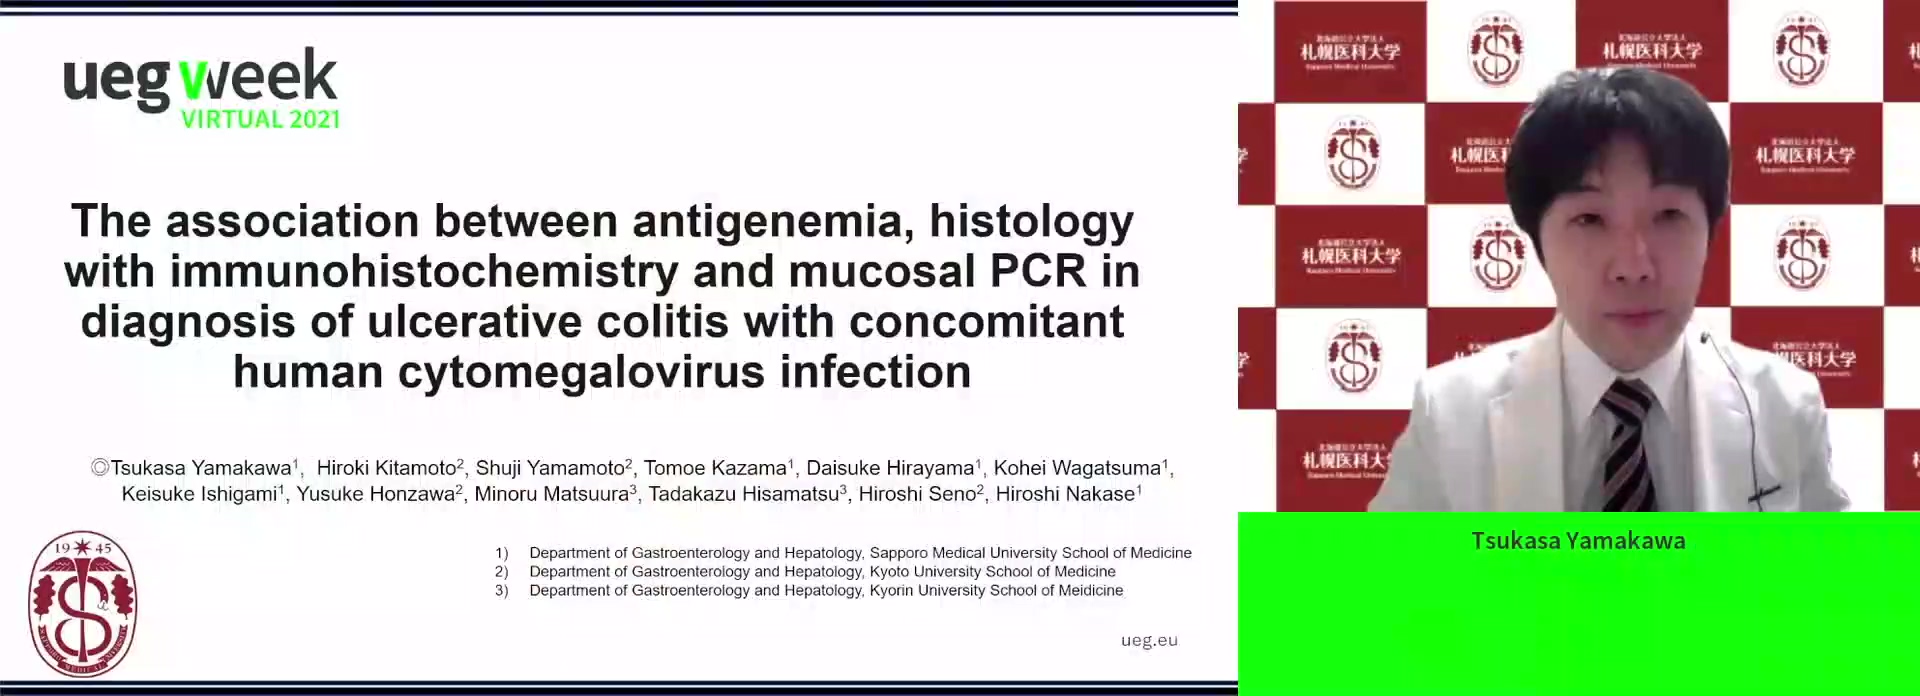 THE ASSOCIATION BETWEEN ANTIGENEMIA, HISTOLOGY WITH IMMUNOHISTOCHEMISTRY AND MUCOSAL PCR IN DIAGNOSIS OF ULCERATIVE COLITIS WITH CONCOMITANT HUMAN CYTOMEGALOVIRUS INFECTION